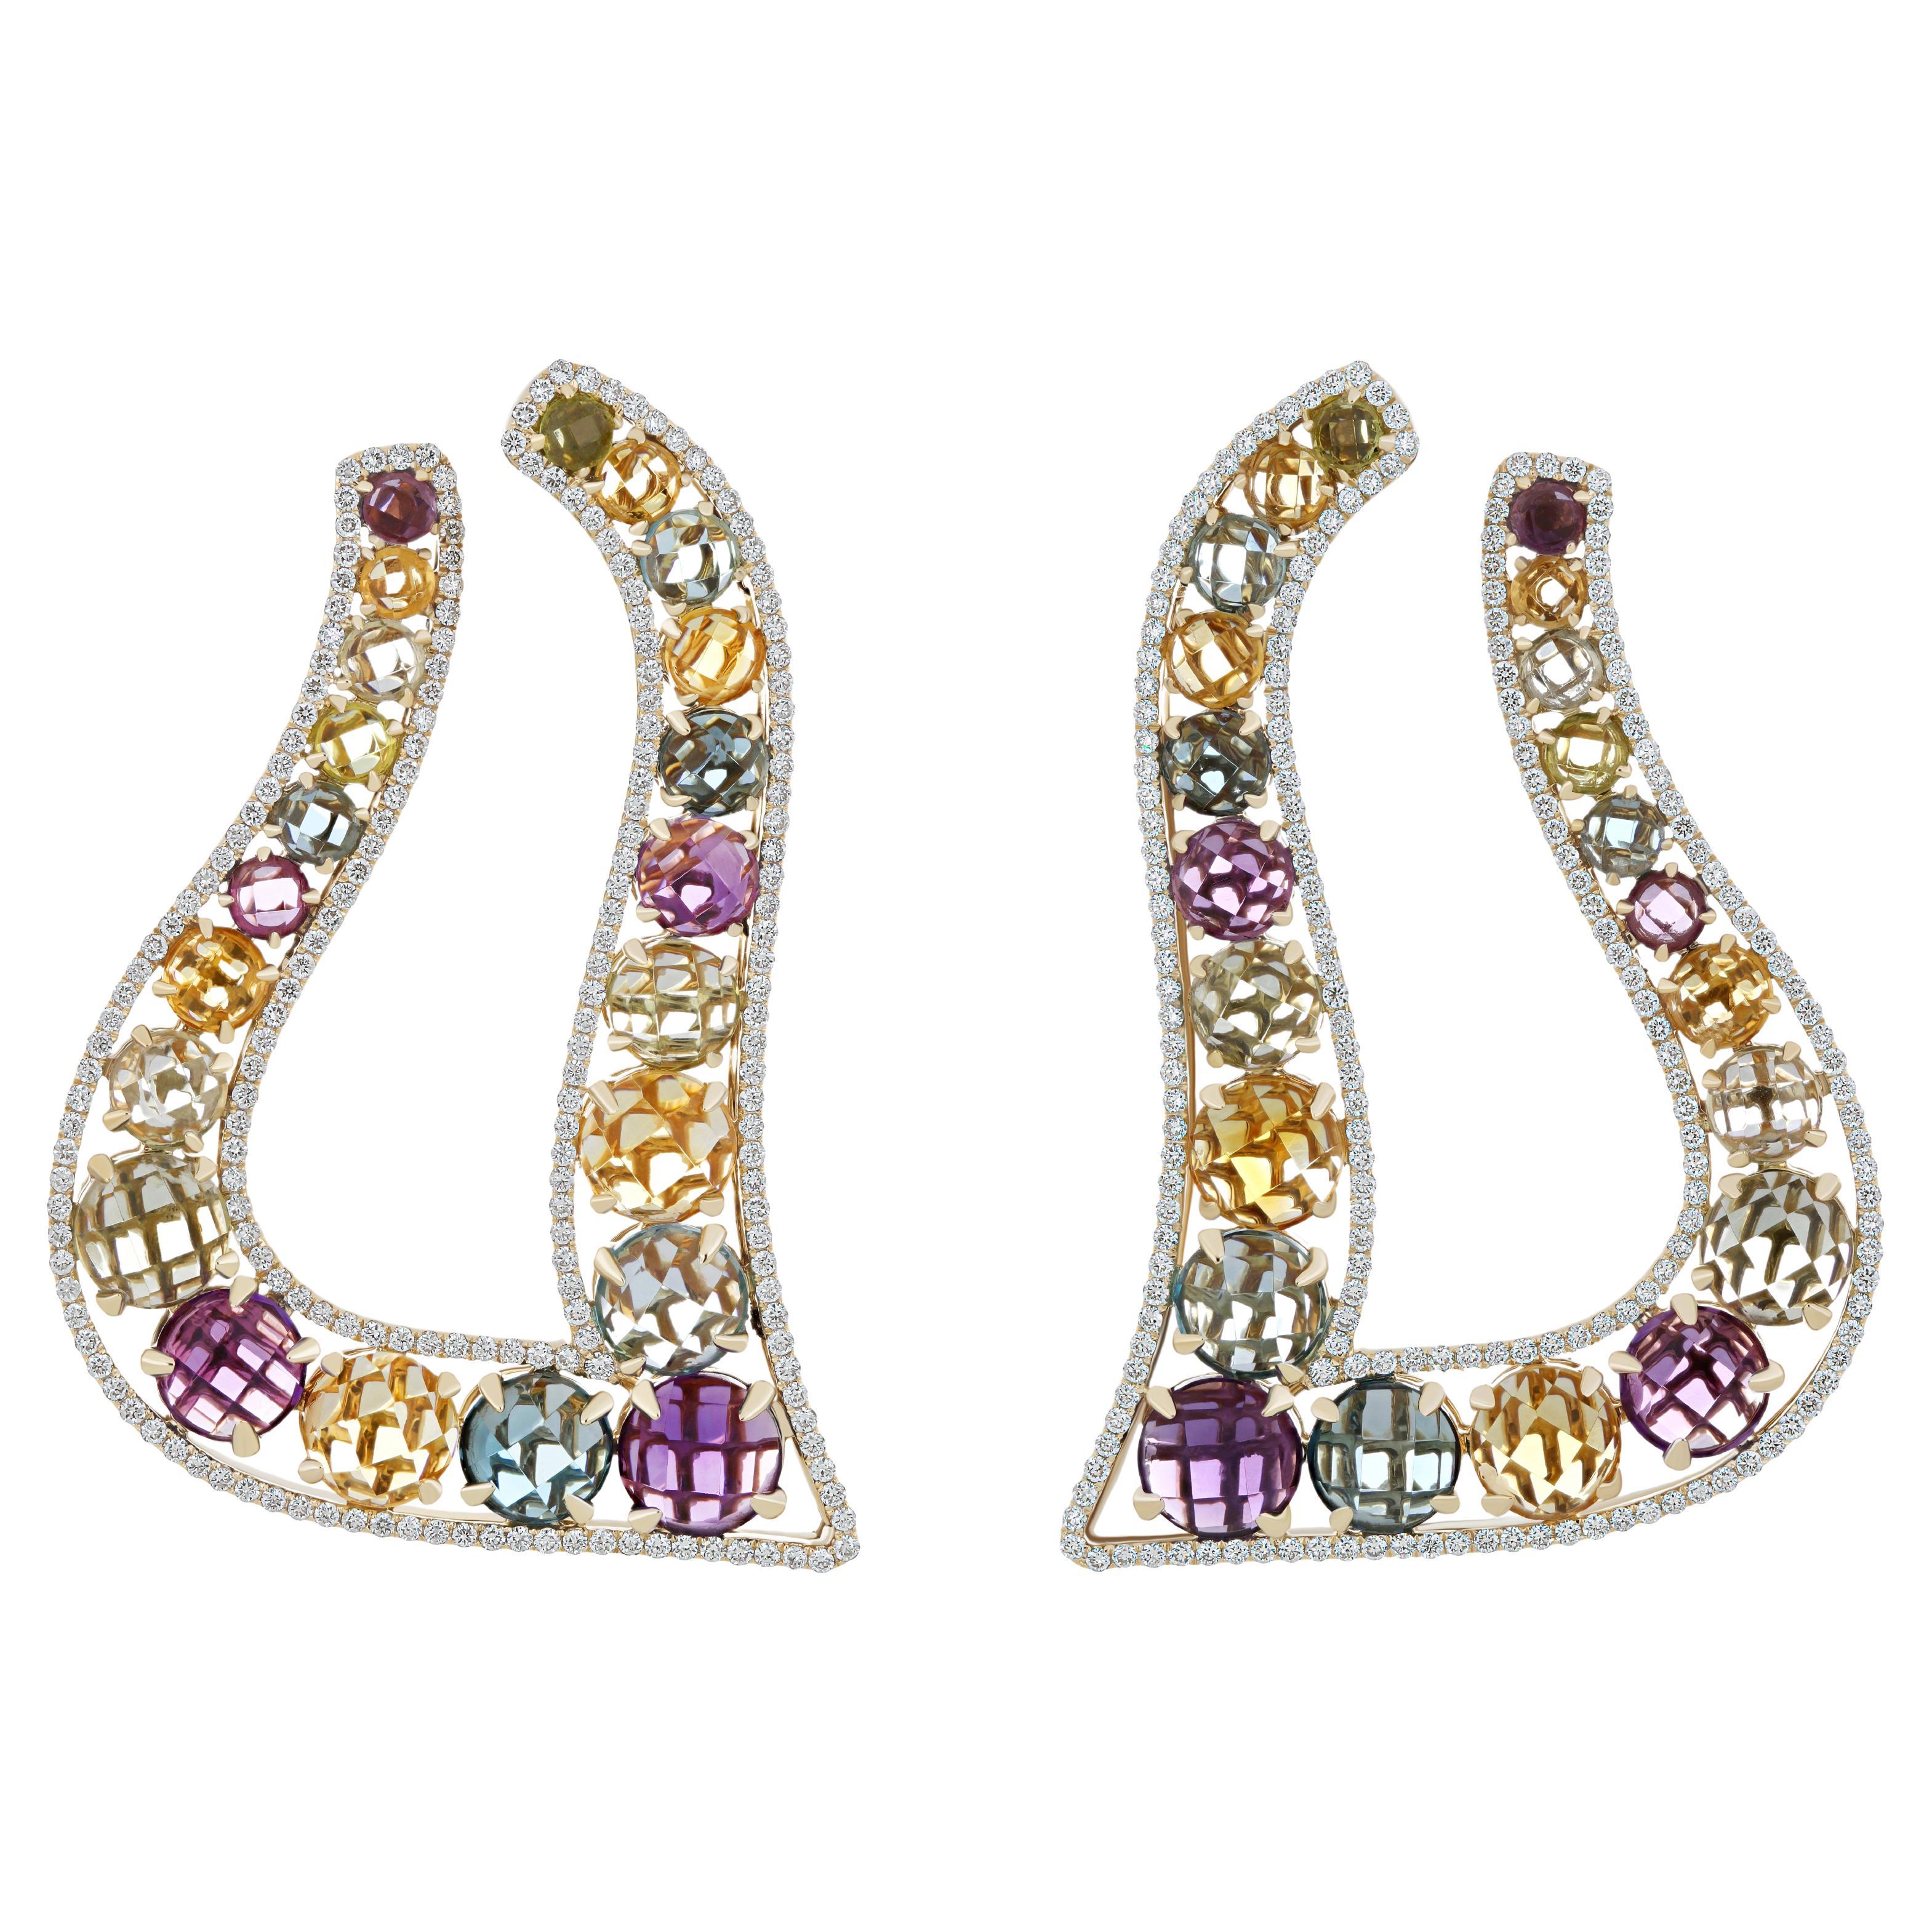 Multi-Gemstone and Diamond Earring in 14k Yellow Gold for Womens Party Wear